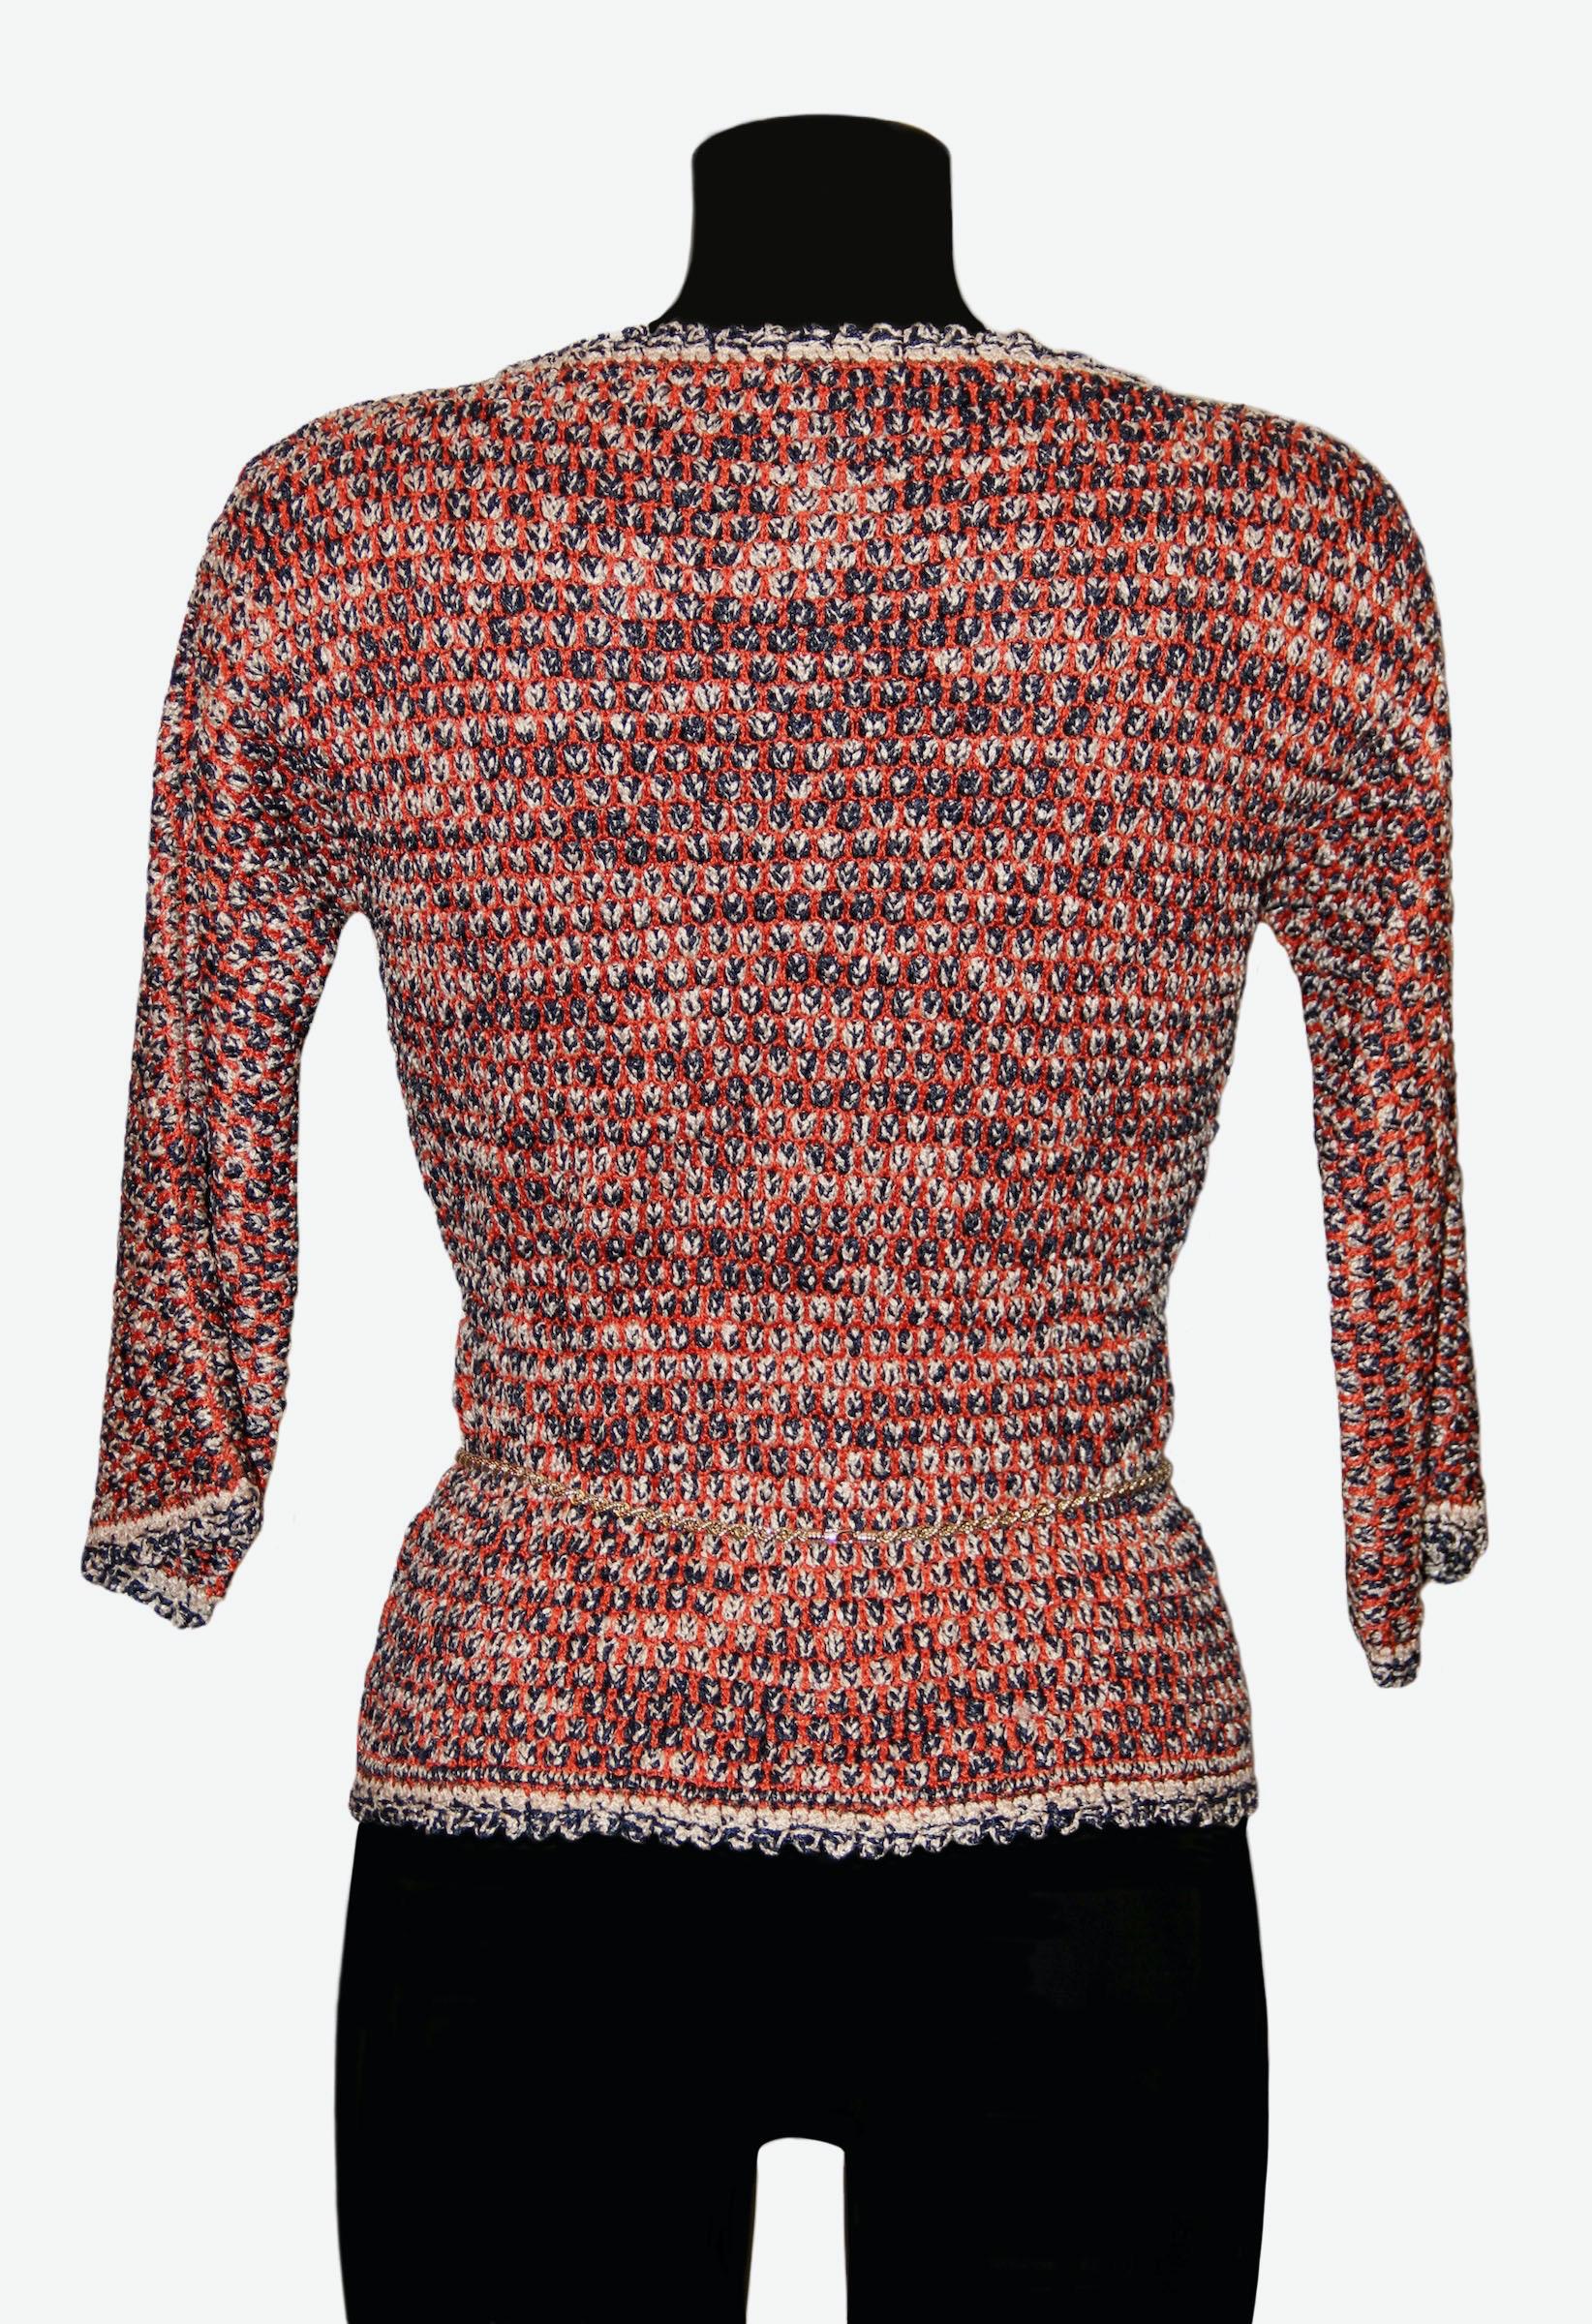 Beautiful top from the house of Chanel.
Knitted in a mix of navy, orange and beige viscose, it is slightly fitted with a navy cord with gold-tone finish chain.

Fabric: 76% viscose - 24% polyamide
Color: Navy, orange and beige
Size: 36
Measurements: